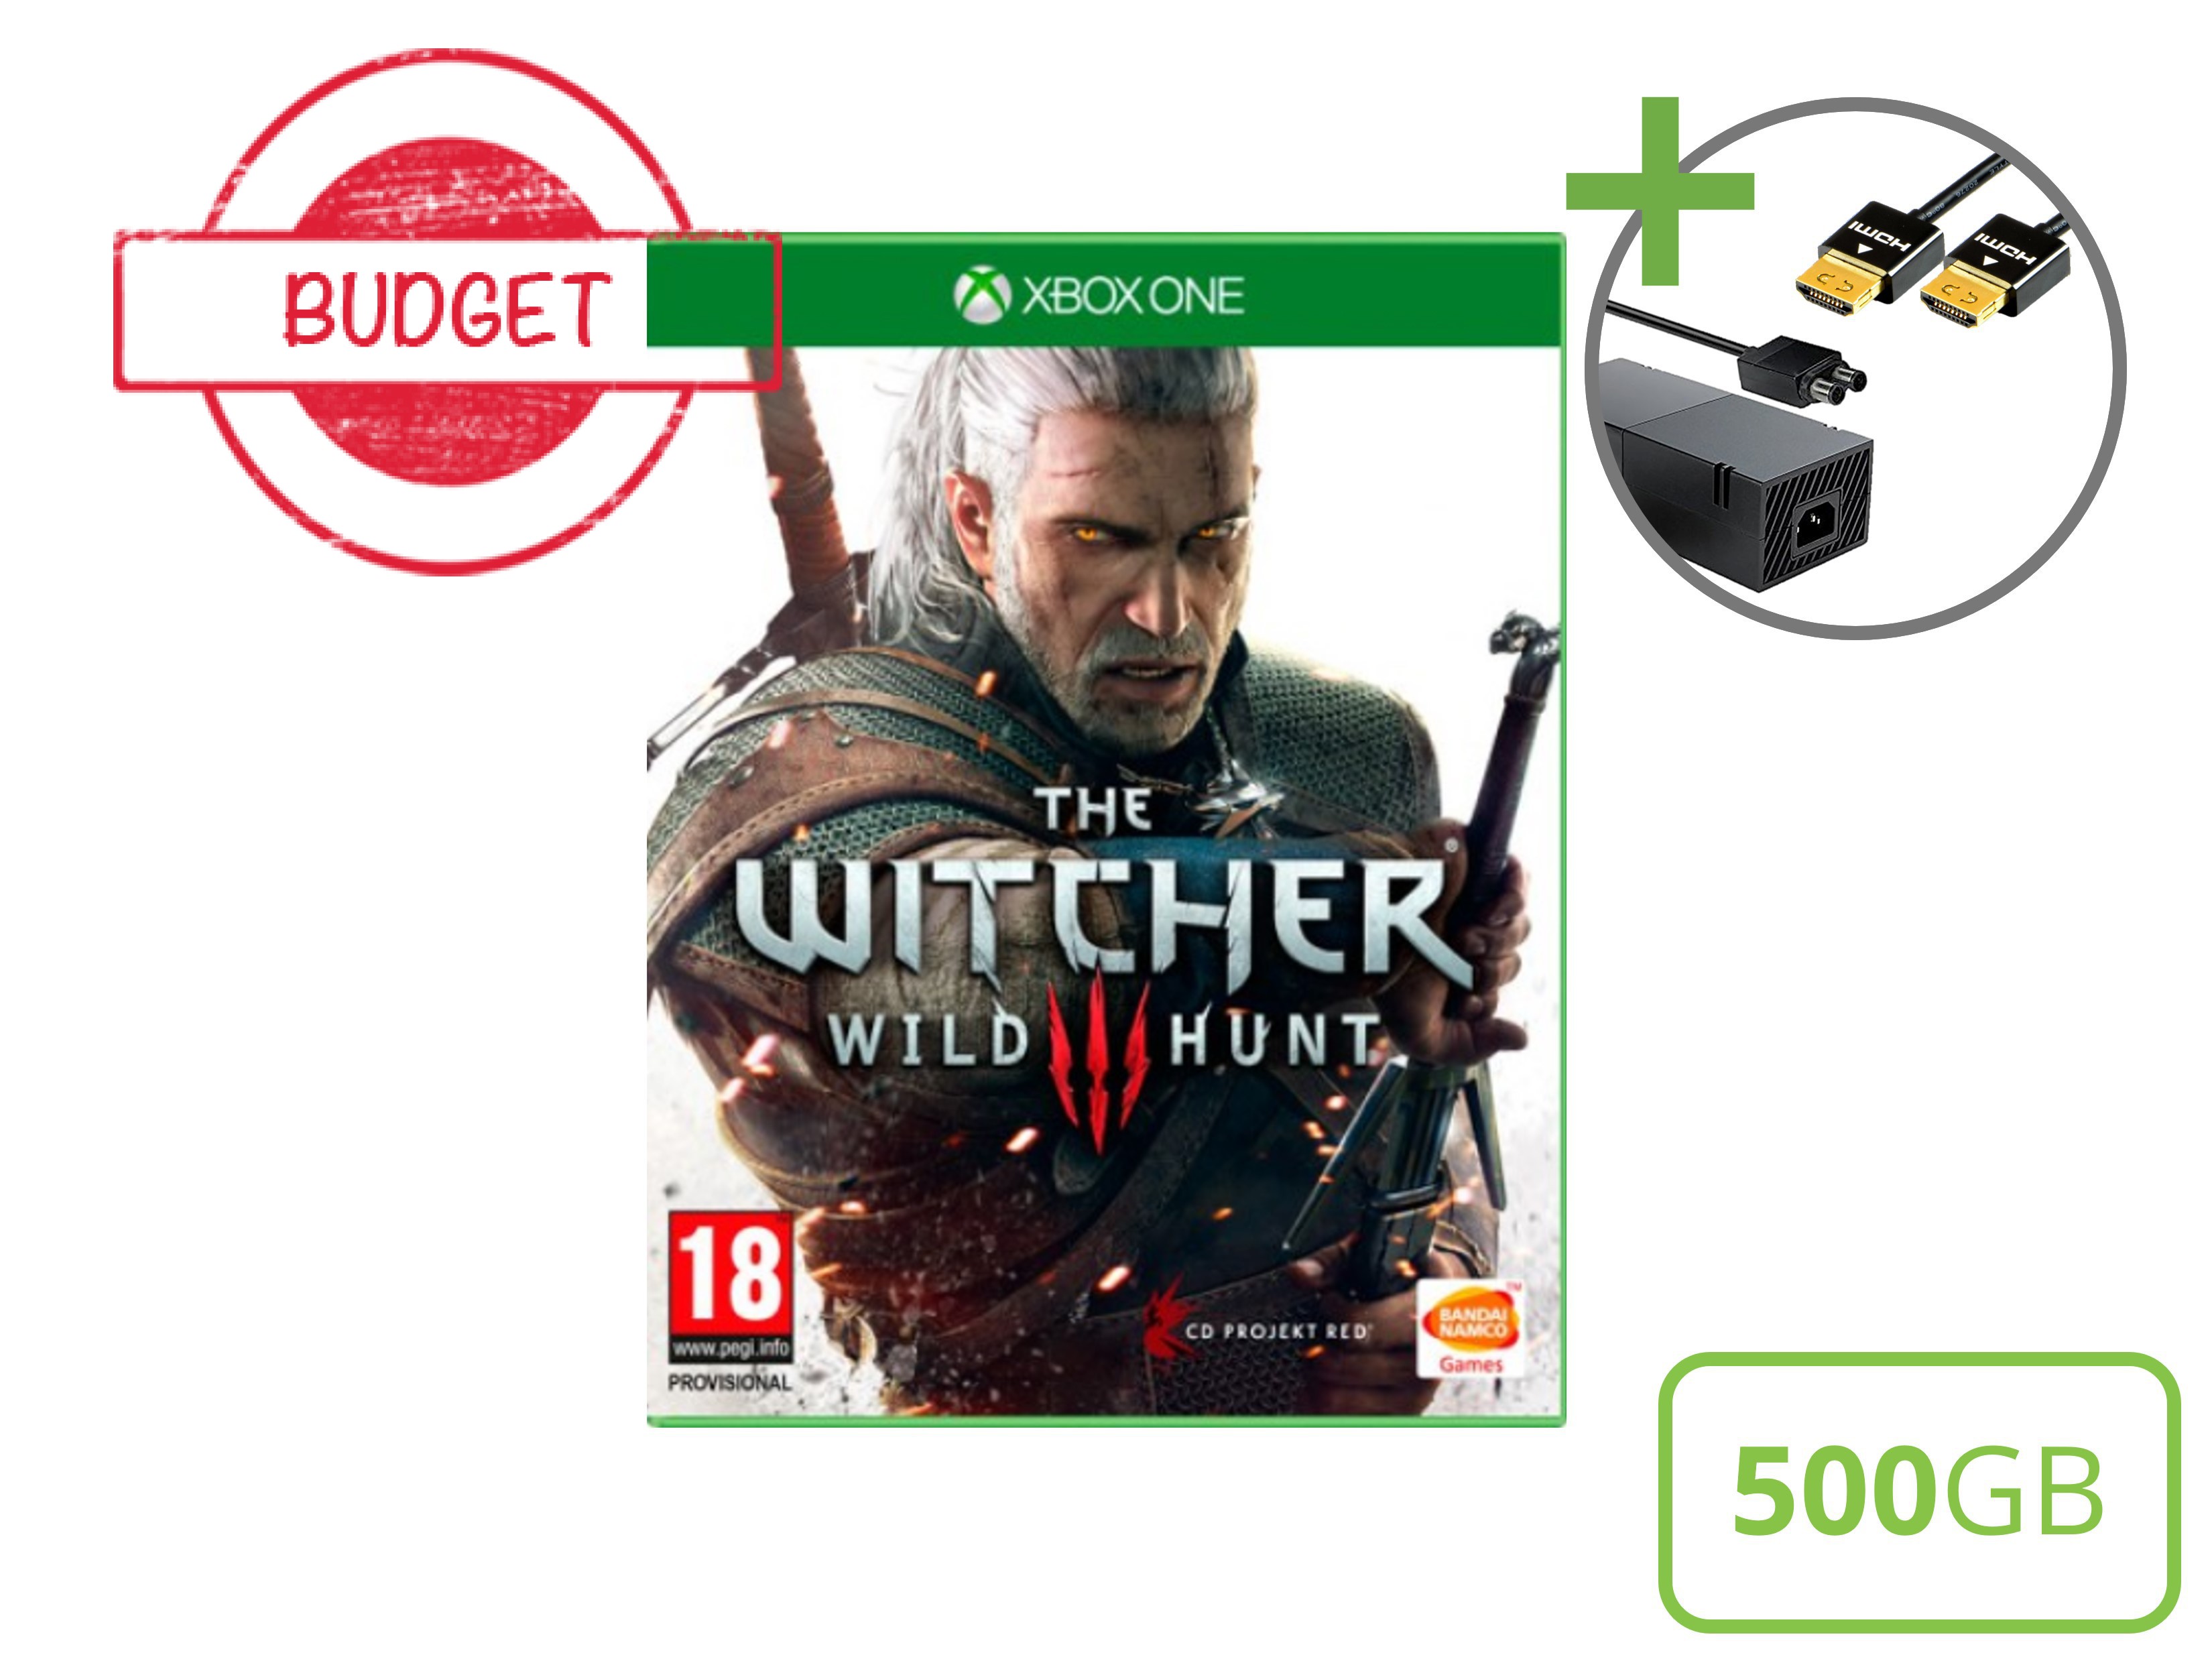 Microsoft Xbox One Starter Pack - 500GB The Witcher 3 Wild Hunt Edition - Budget - Xbox One Hardware - 4